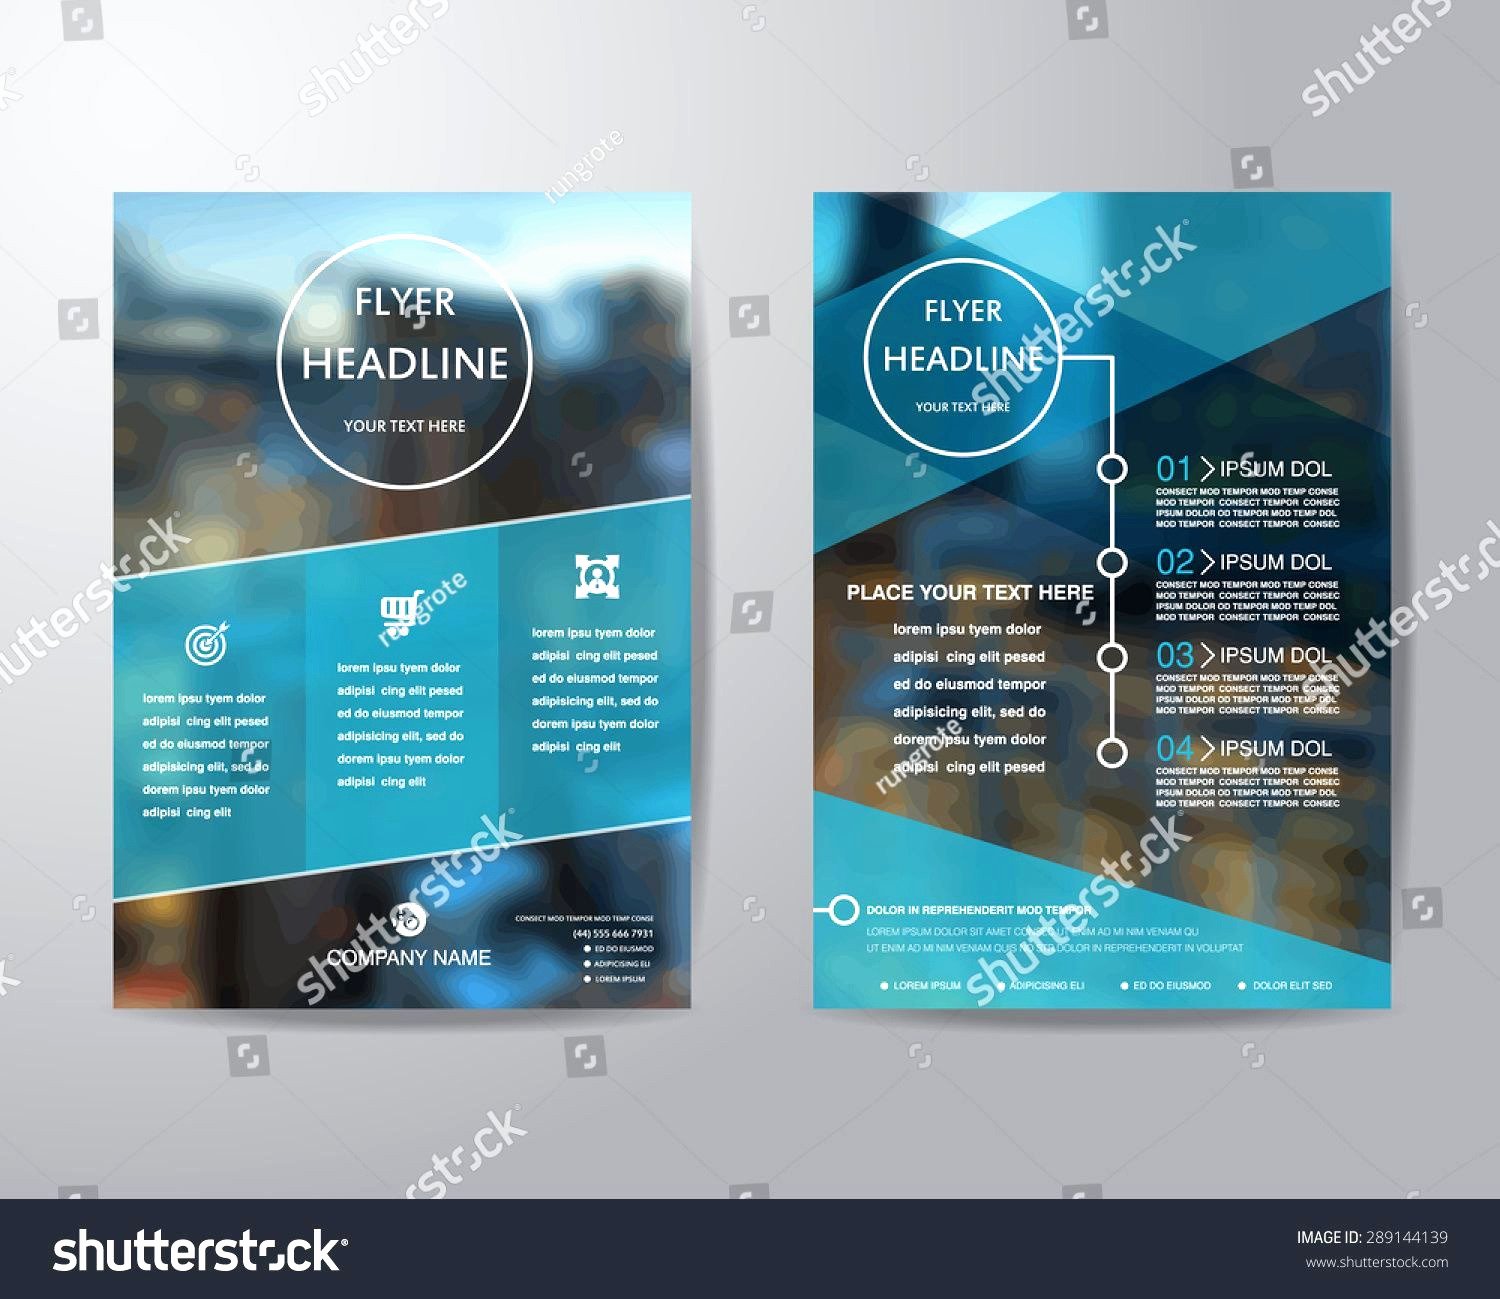 Retractable Banner Design Template Lovely 33 Retractable Banner Design Templates New Templates